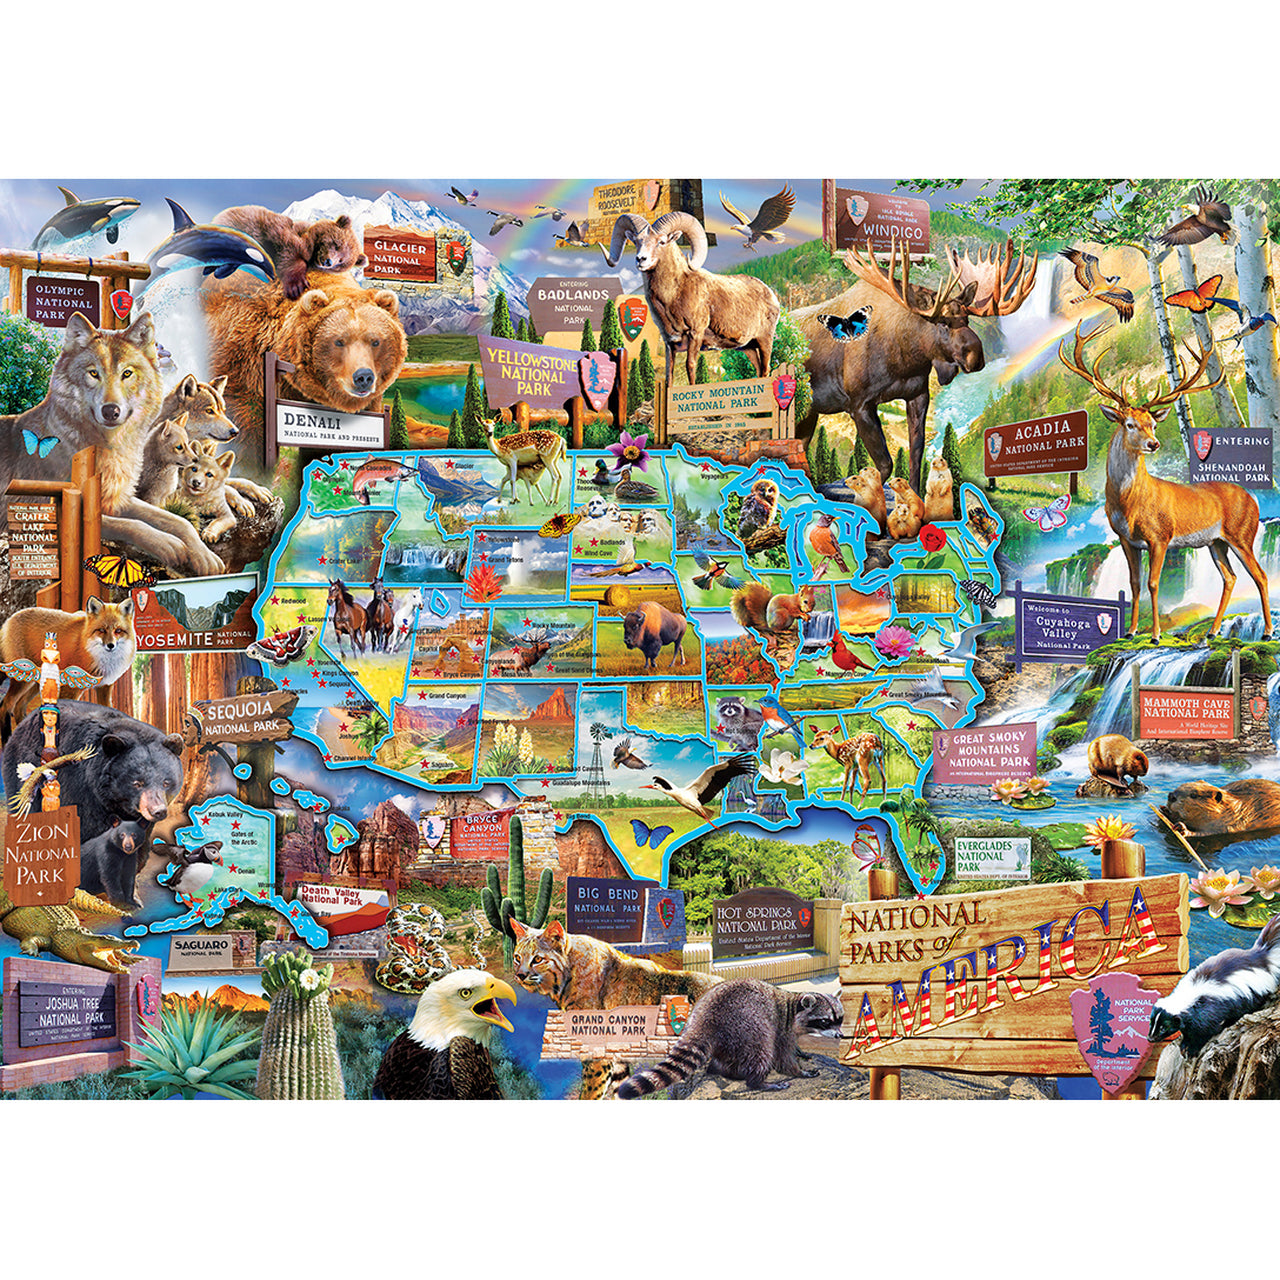 National Parks of America 1000 Piece Jigsaw Puzzle by MasterPieces